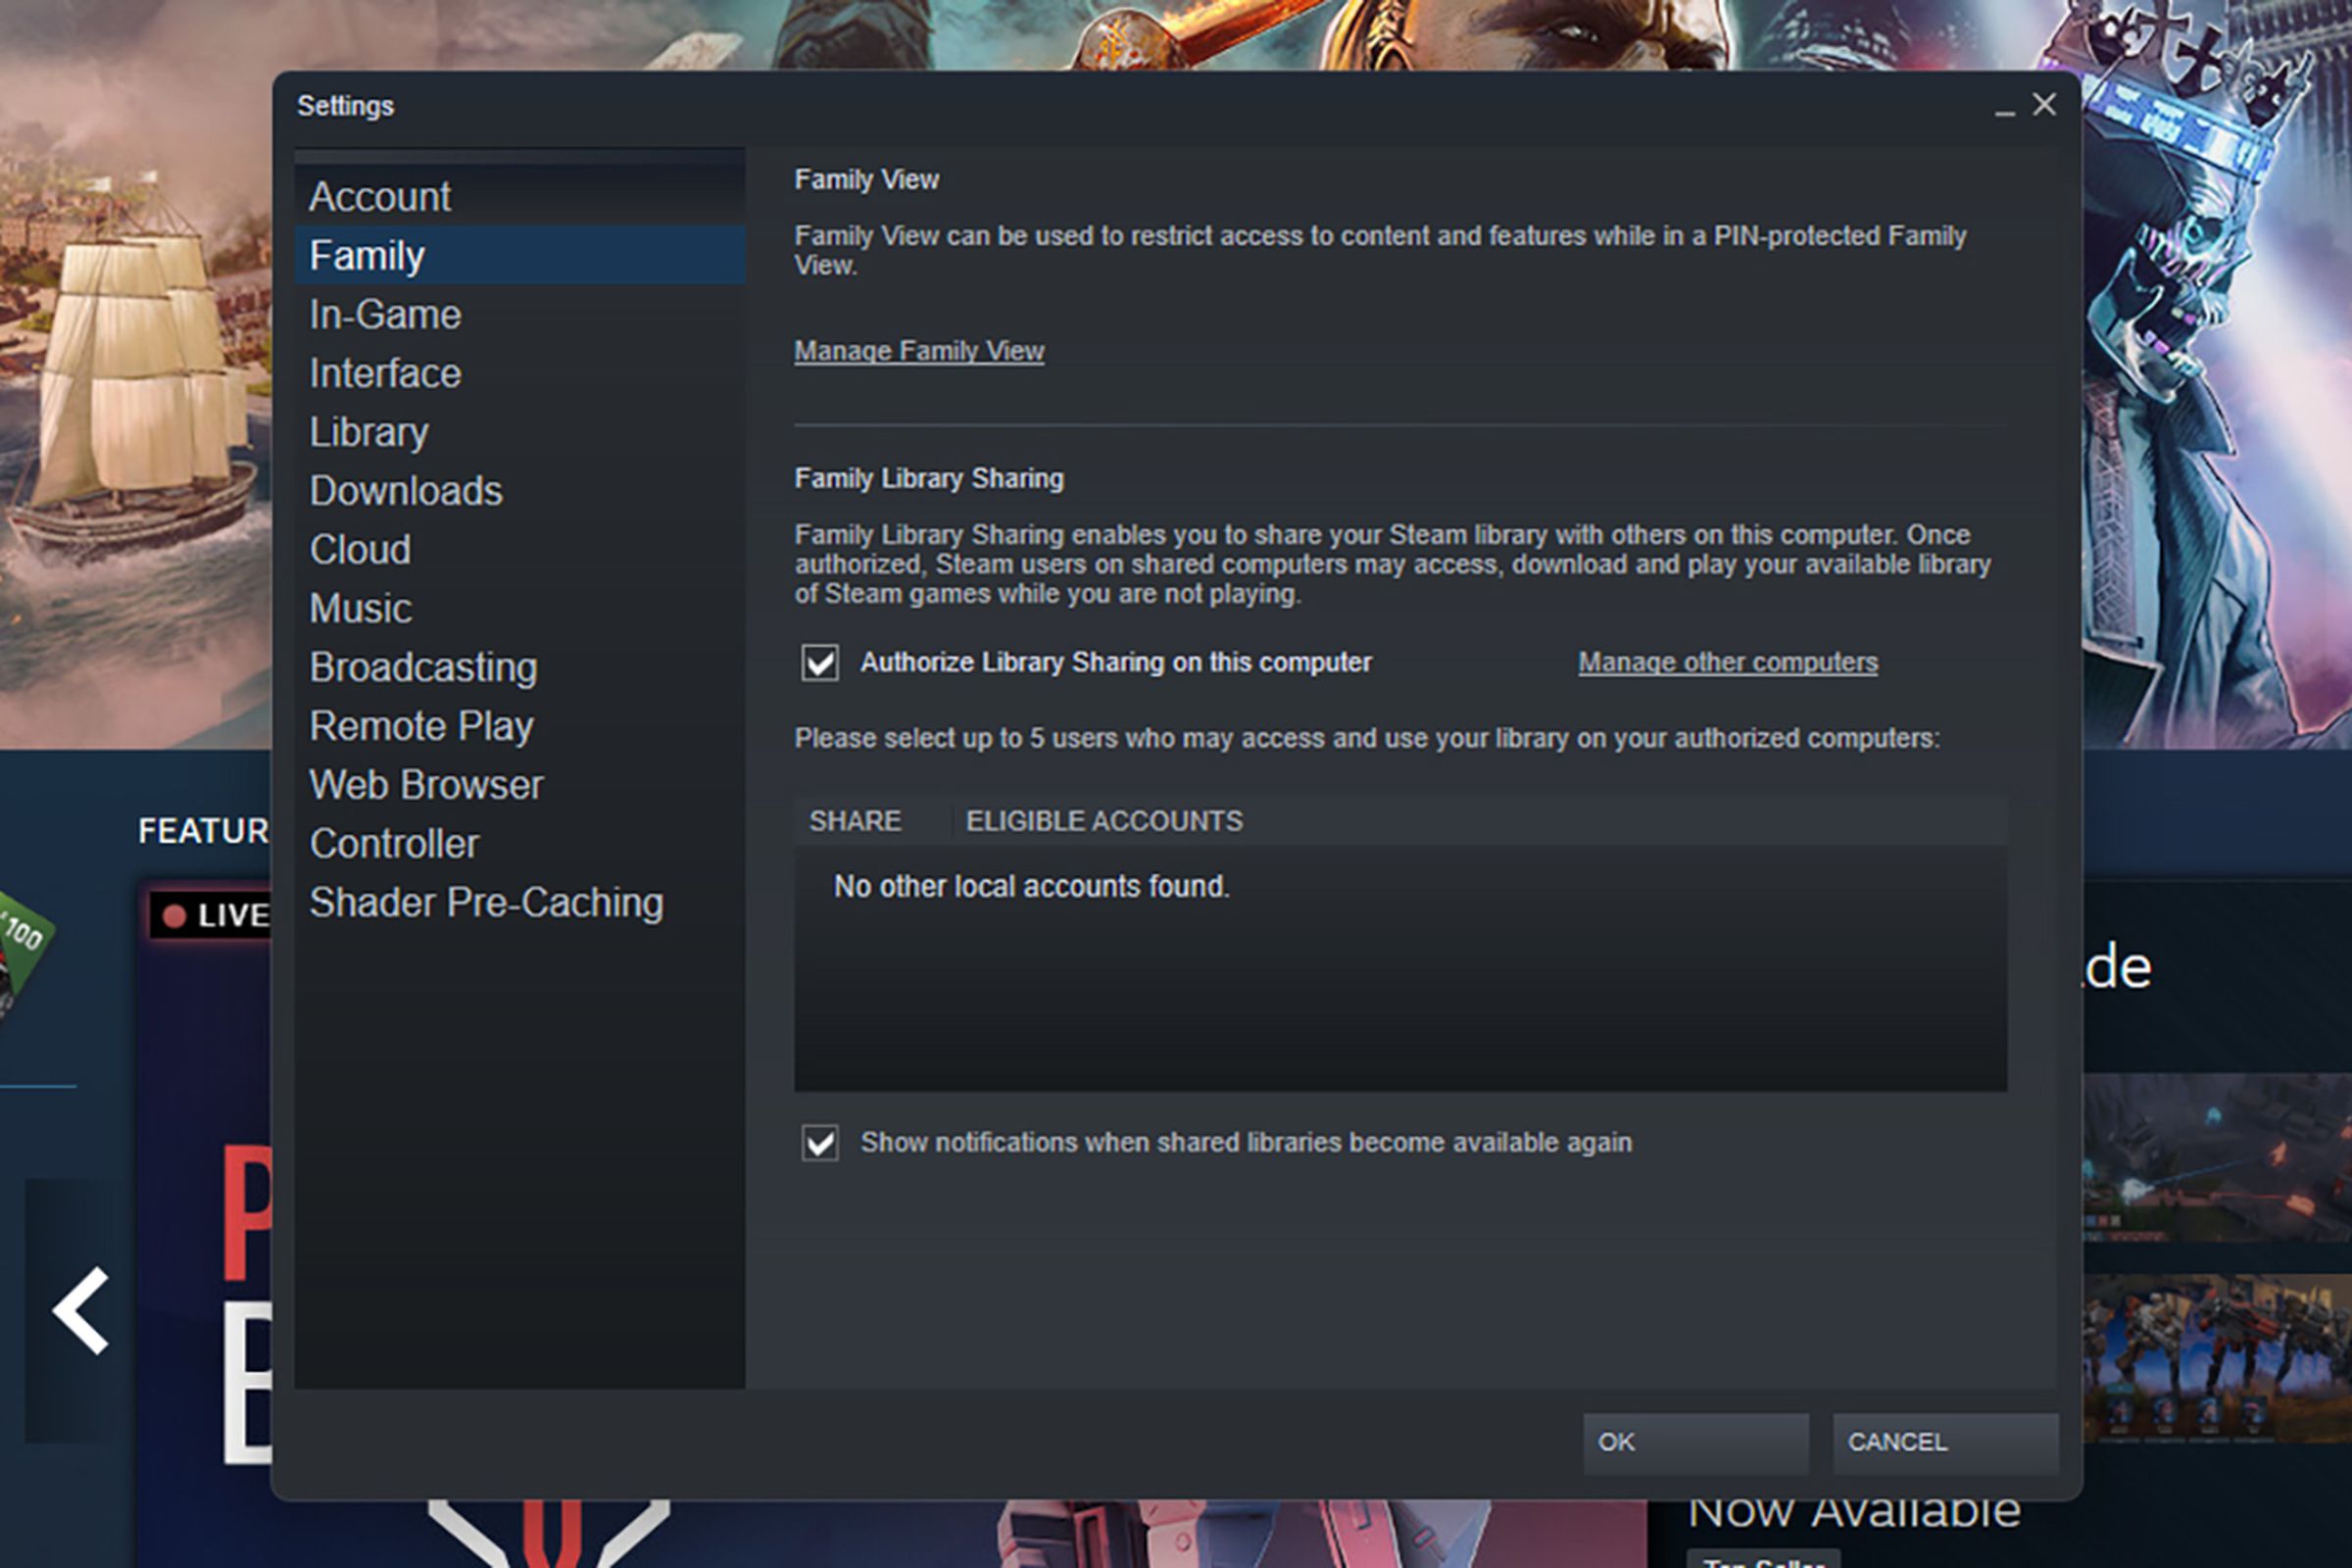 Steam Settings windows showing menu in left column, the words “Family View” on top, and various features of the Family view in the central page.